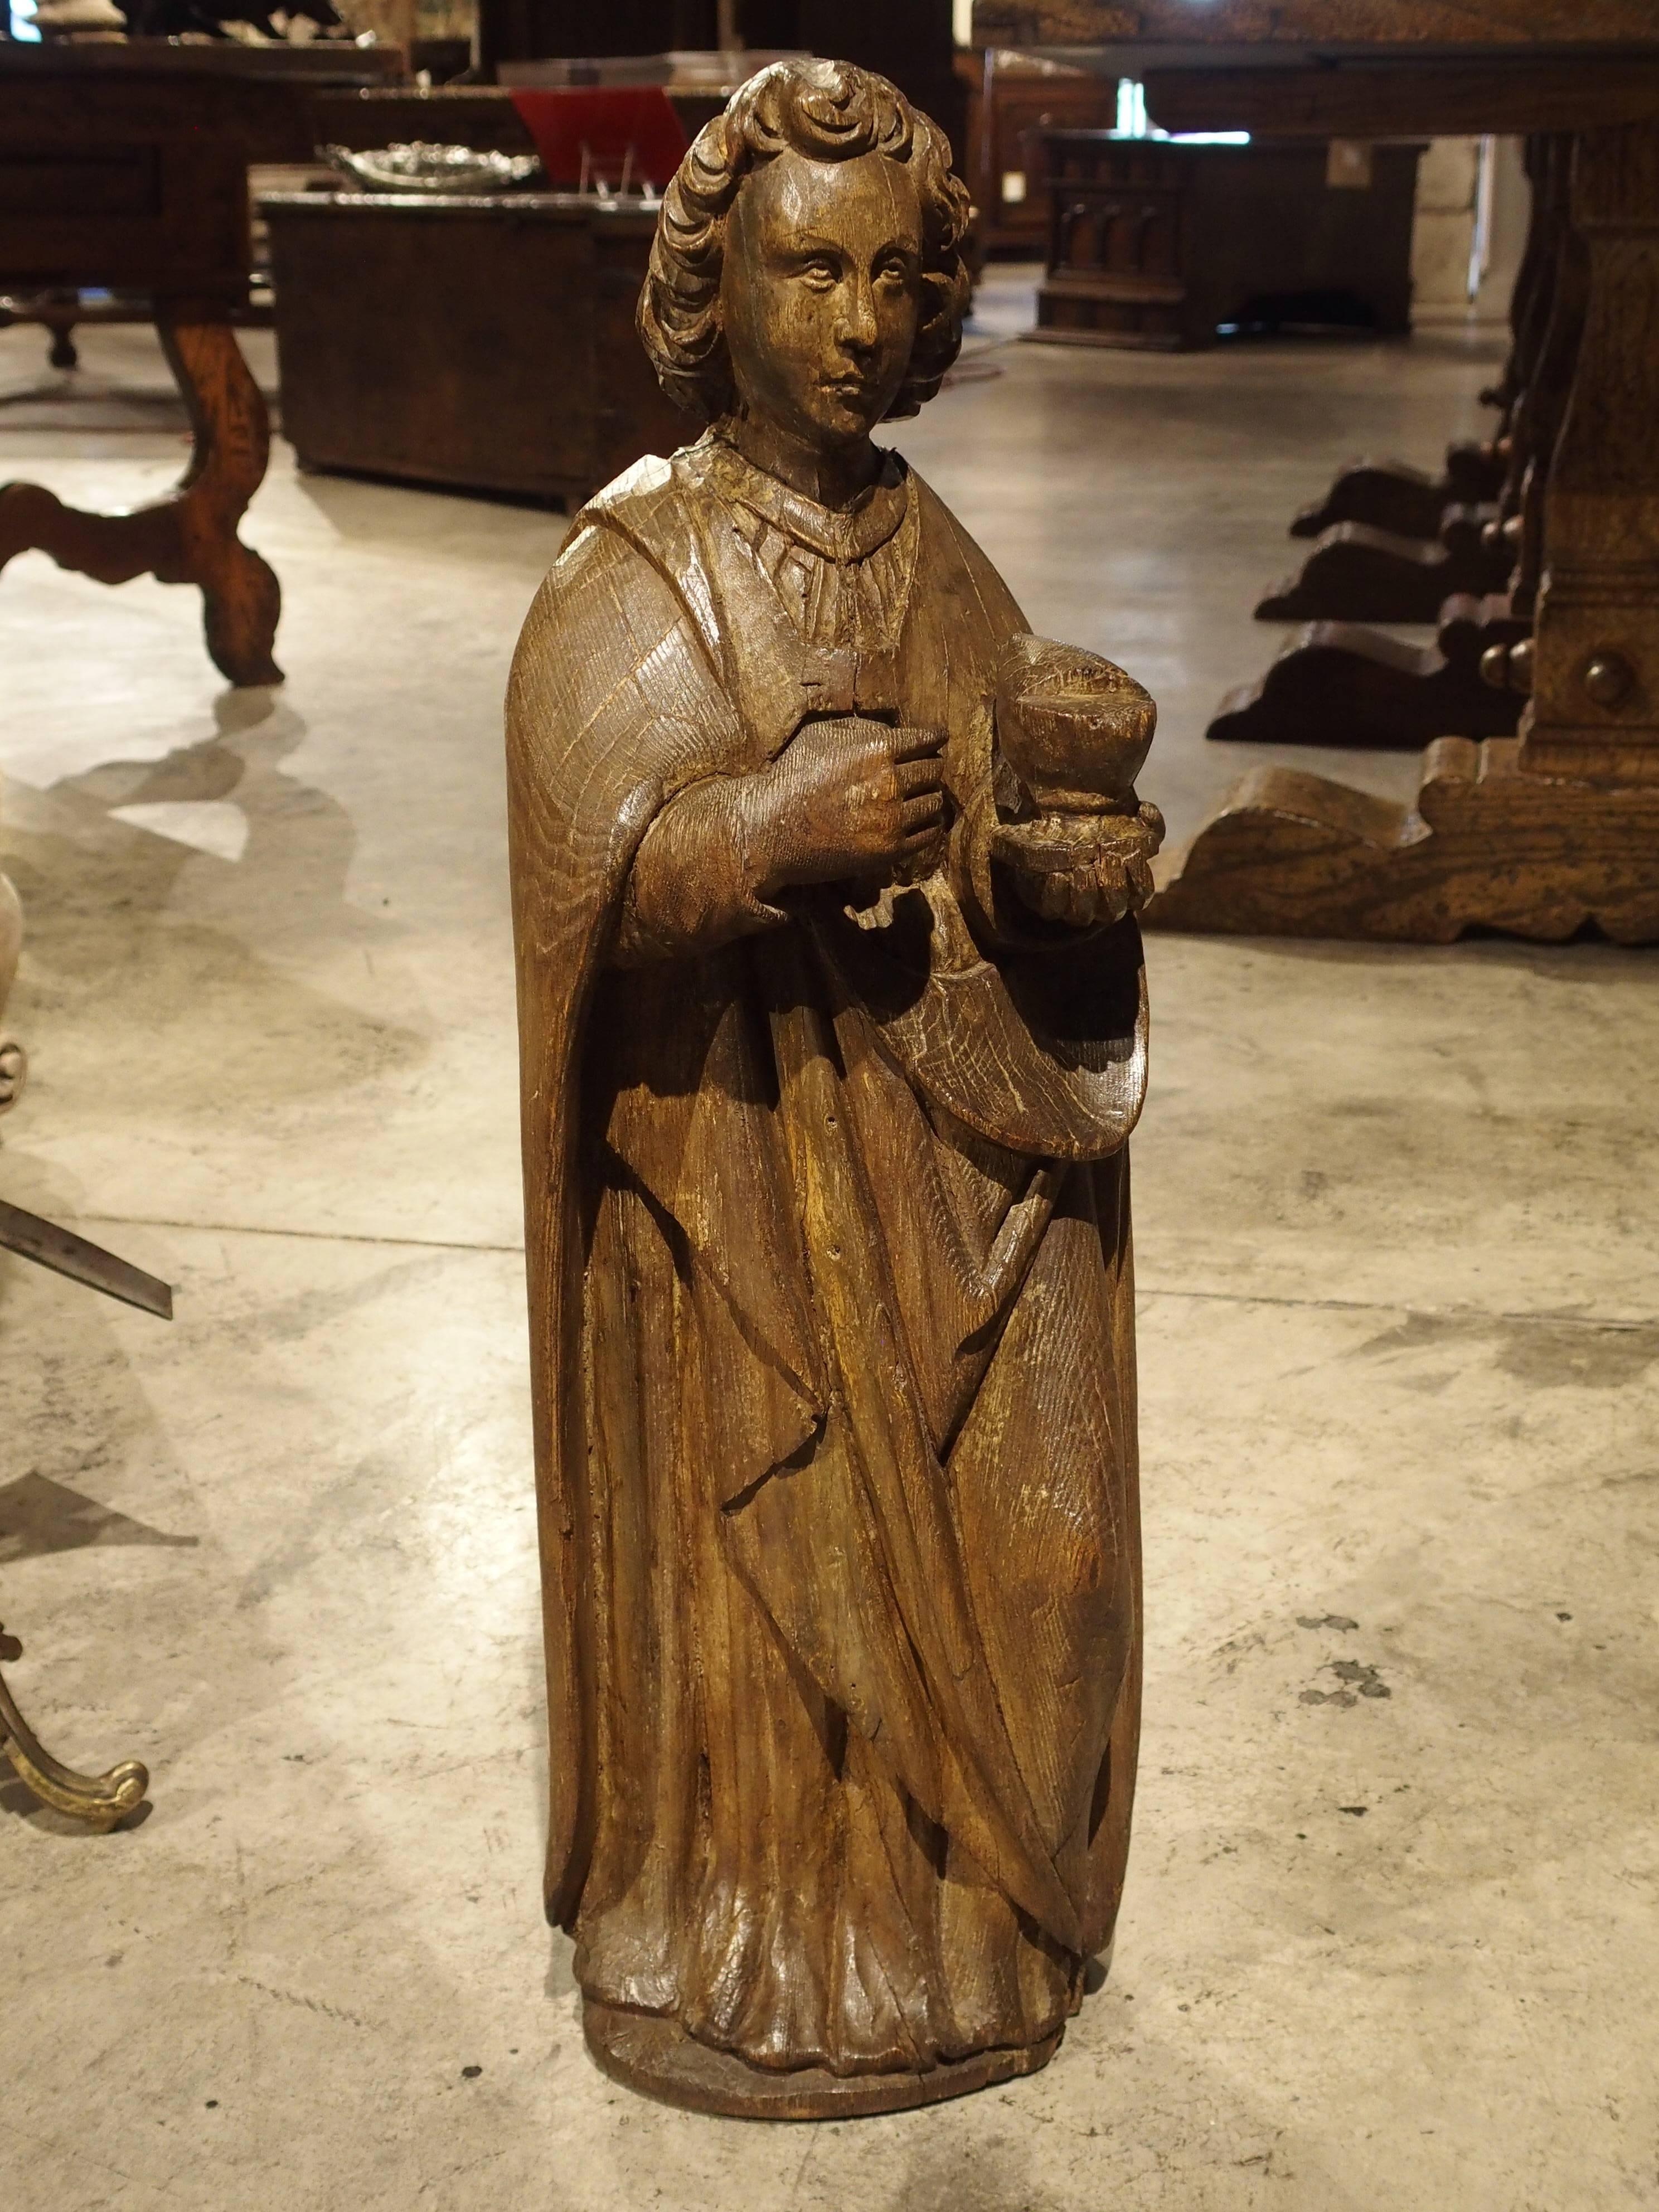 This beautifully hand-carved oak figure represents St John The Evangelist. Probably from Germany, this saint wears a long, draped robe and is holding a chalice in his left hand. Saint John is often depicted with a chalice. It is a reference the